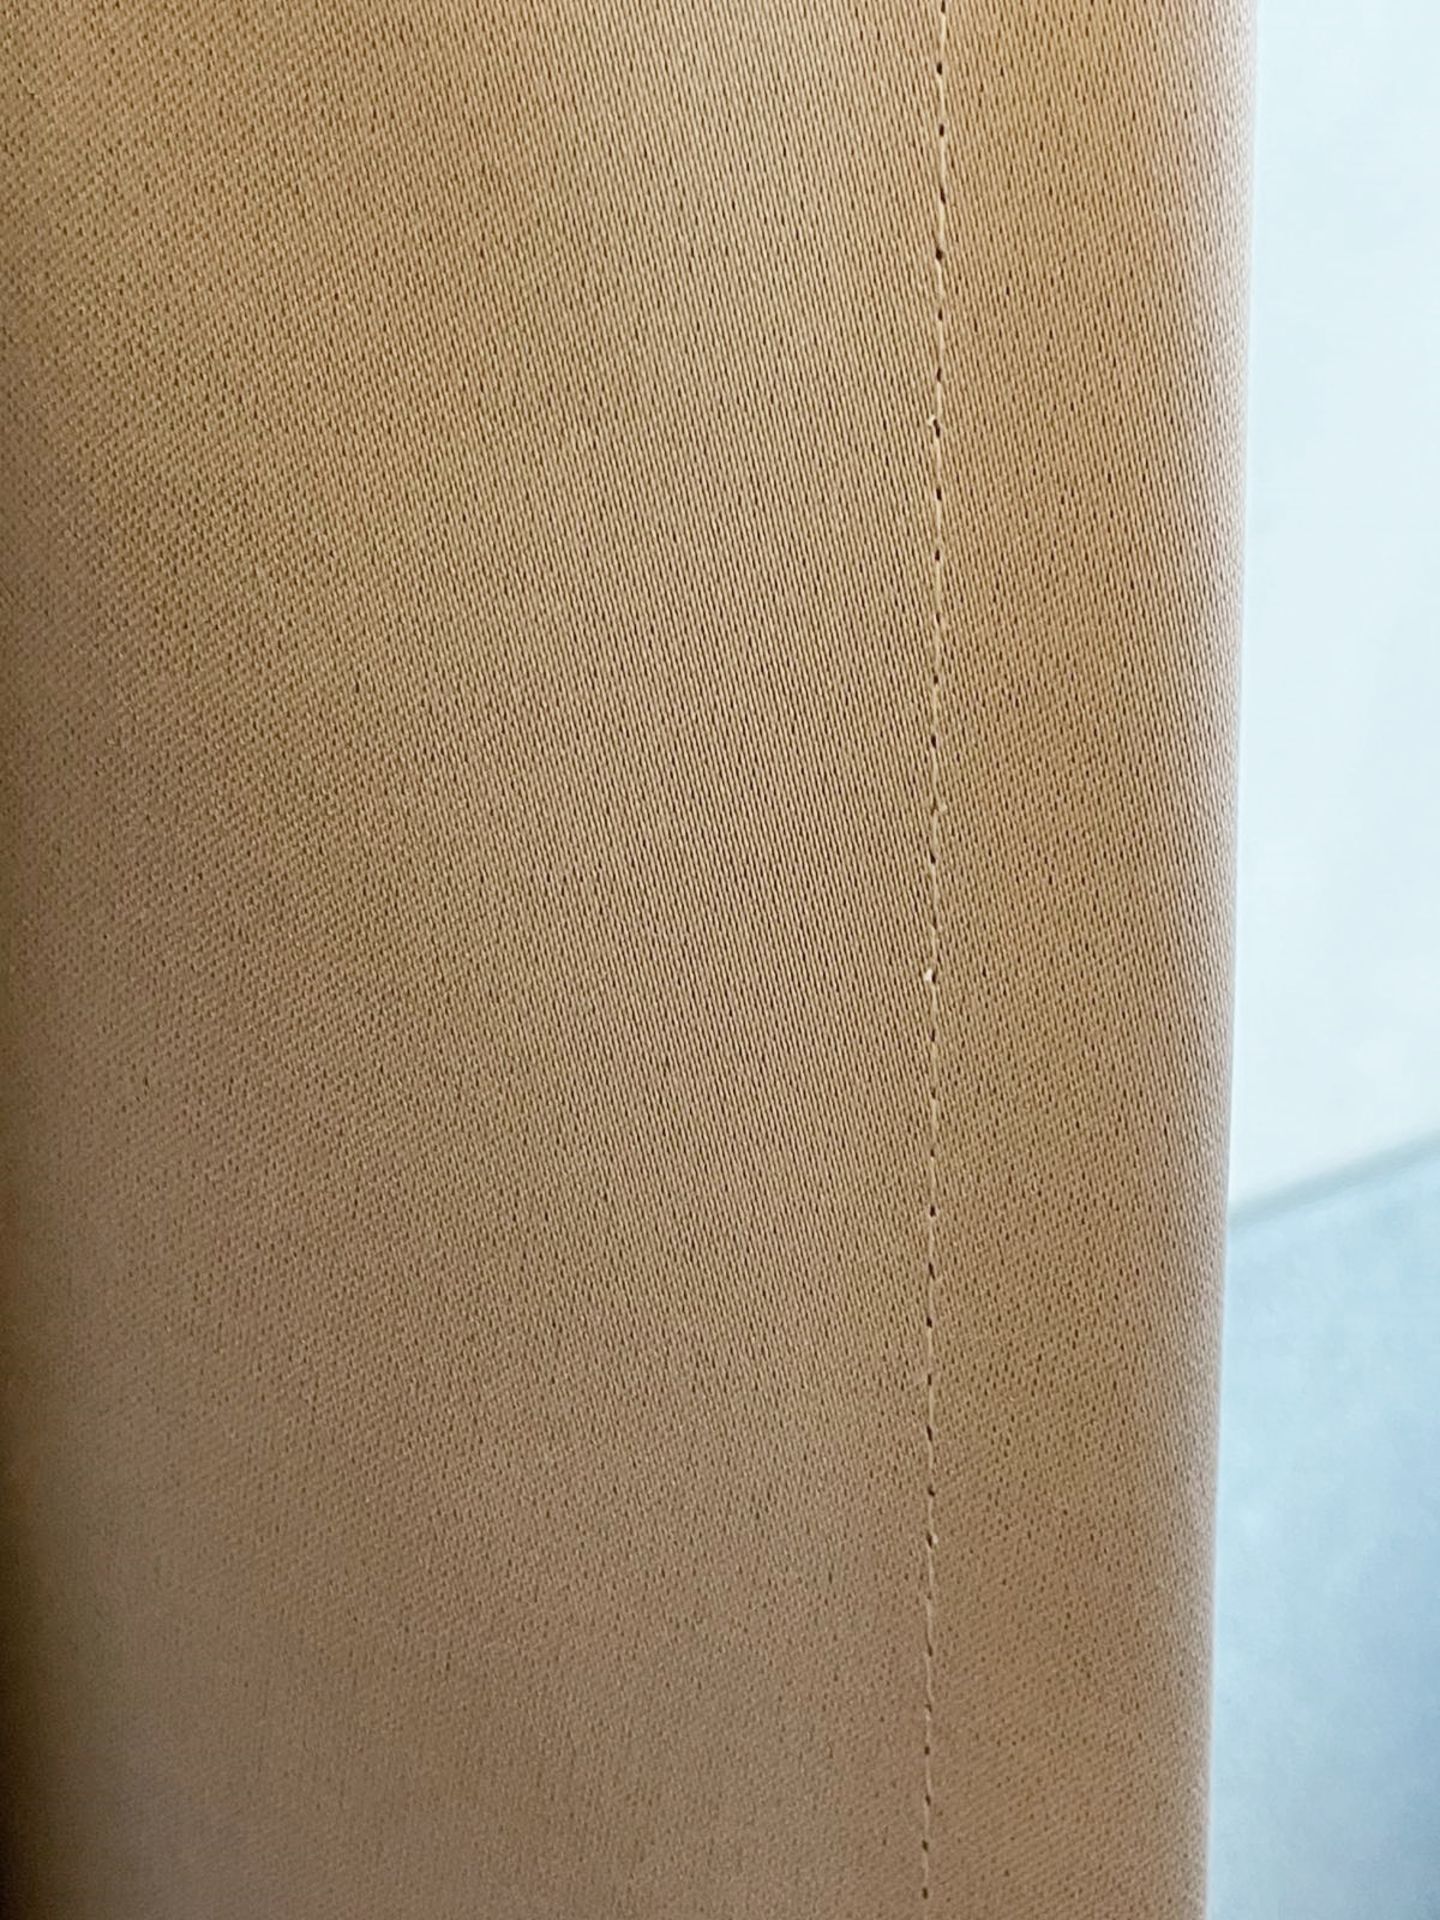 1 x Luxury Lined Bedroom Curtain in a Neutral Tone - CL894  - Ref: BED2 - NO VAT ON THE HAMMER - Image 4 of 5